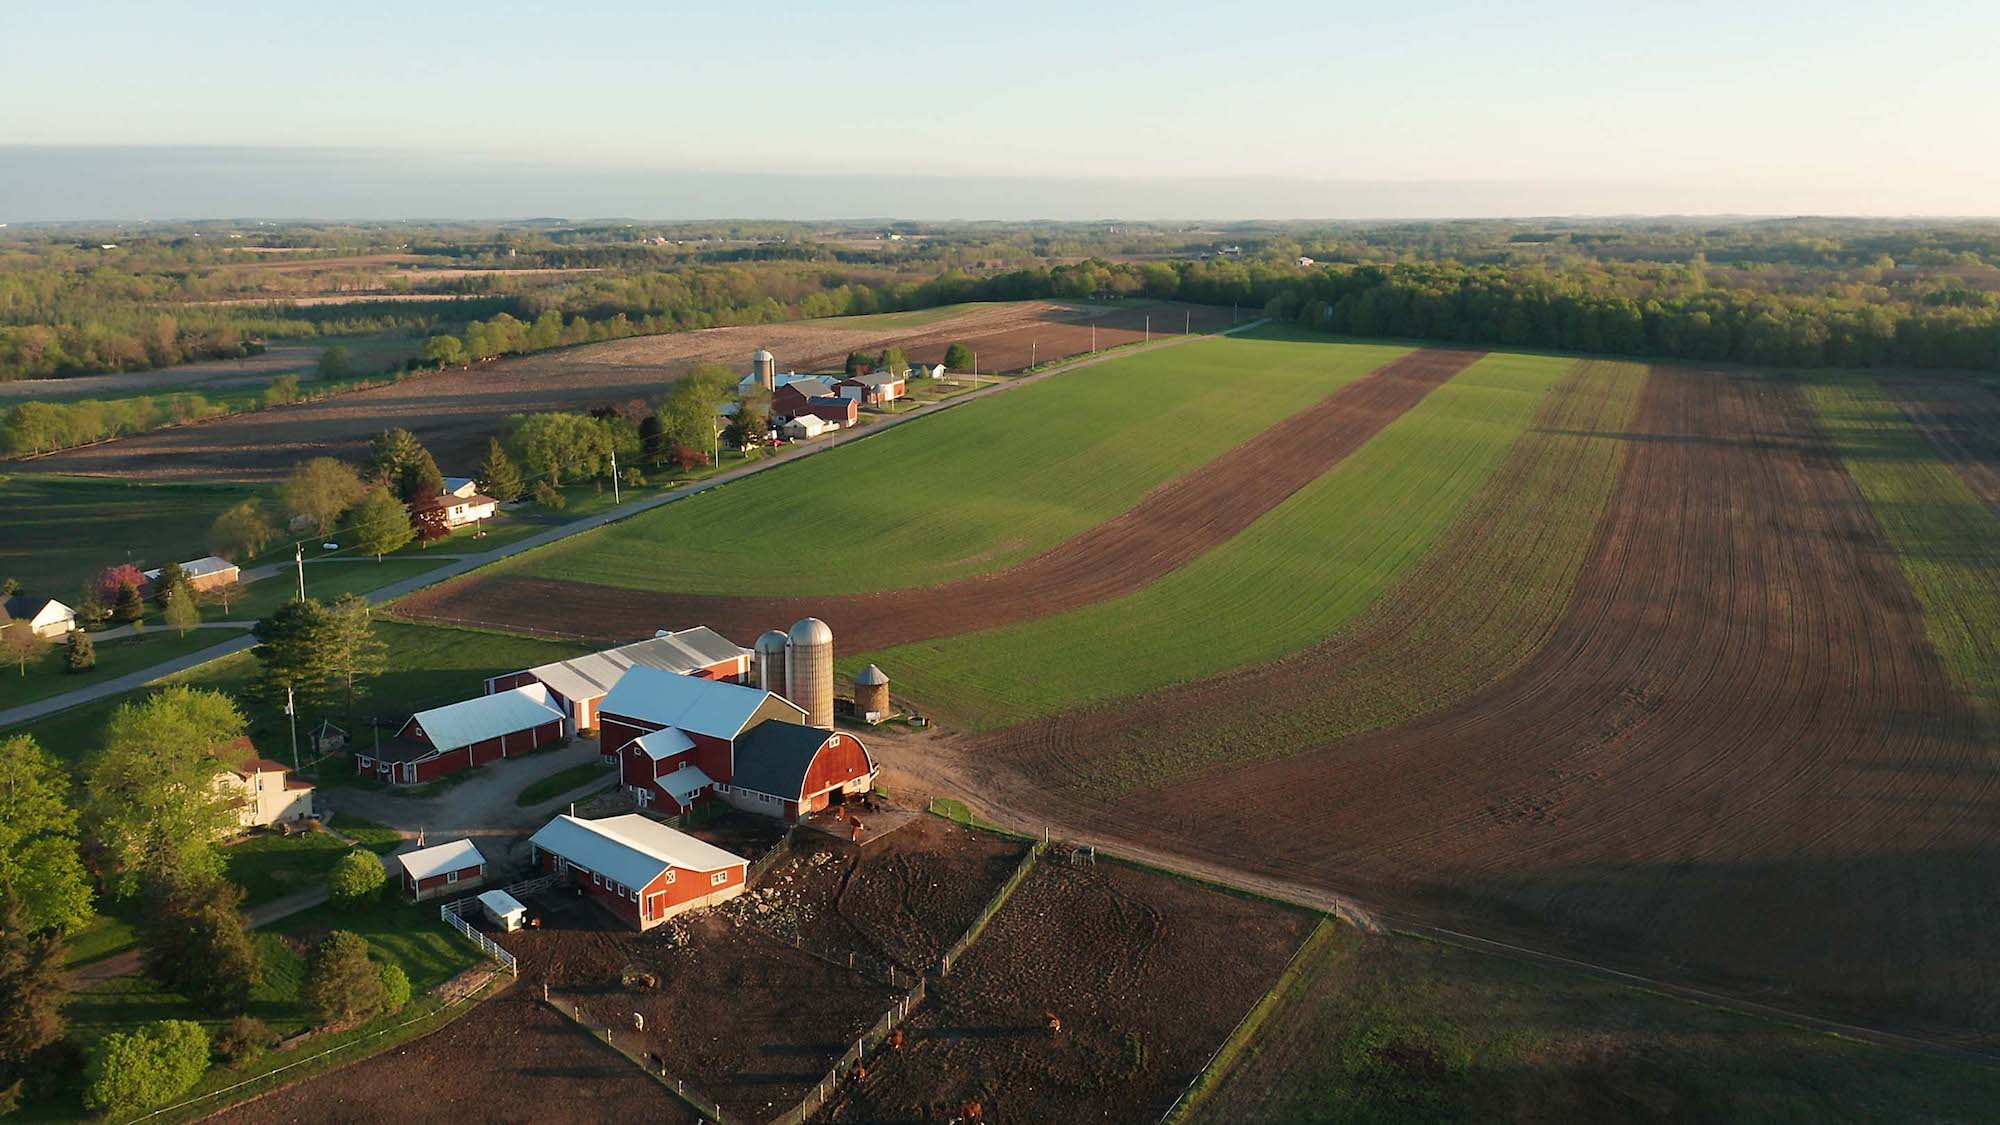 Aerial view of a farm featuring red barn buildings, silos, and expansive green and brown fields. The farm is surrounded by a few scattered trees and additional buildings in the background with a roadway running nearby. The scene is lit by soft daylight.